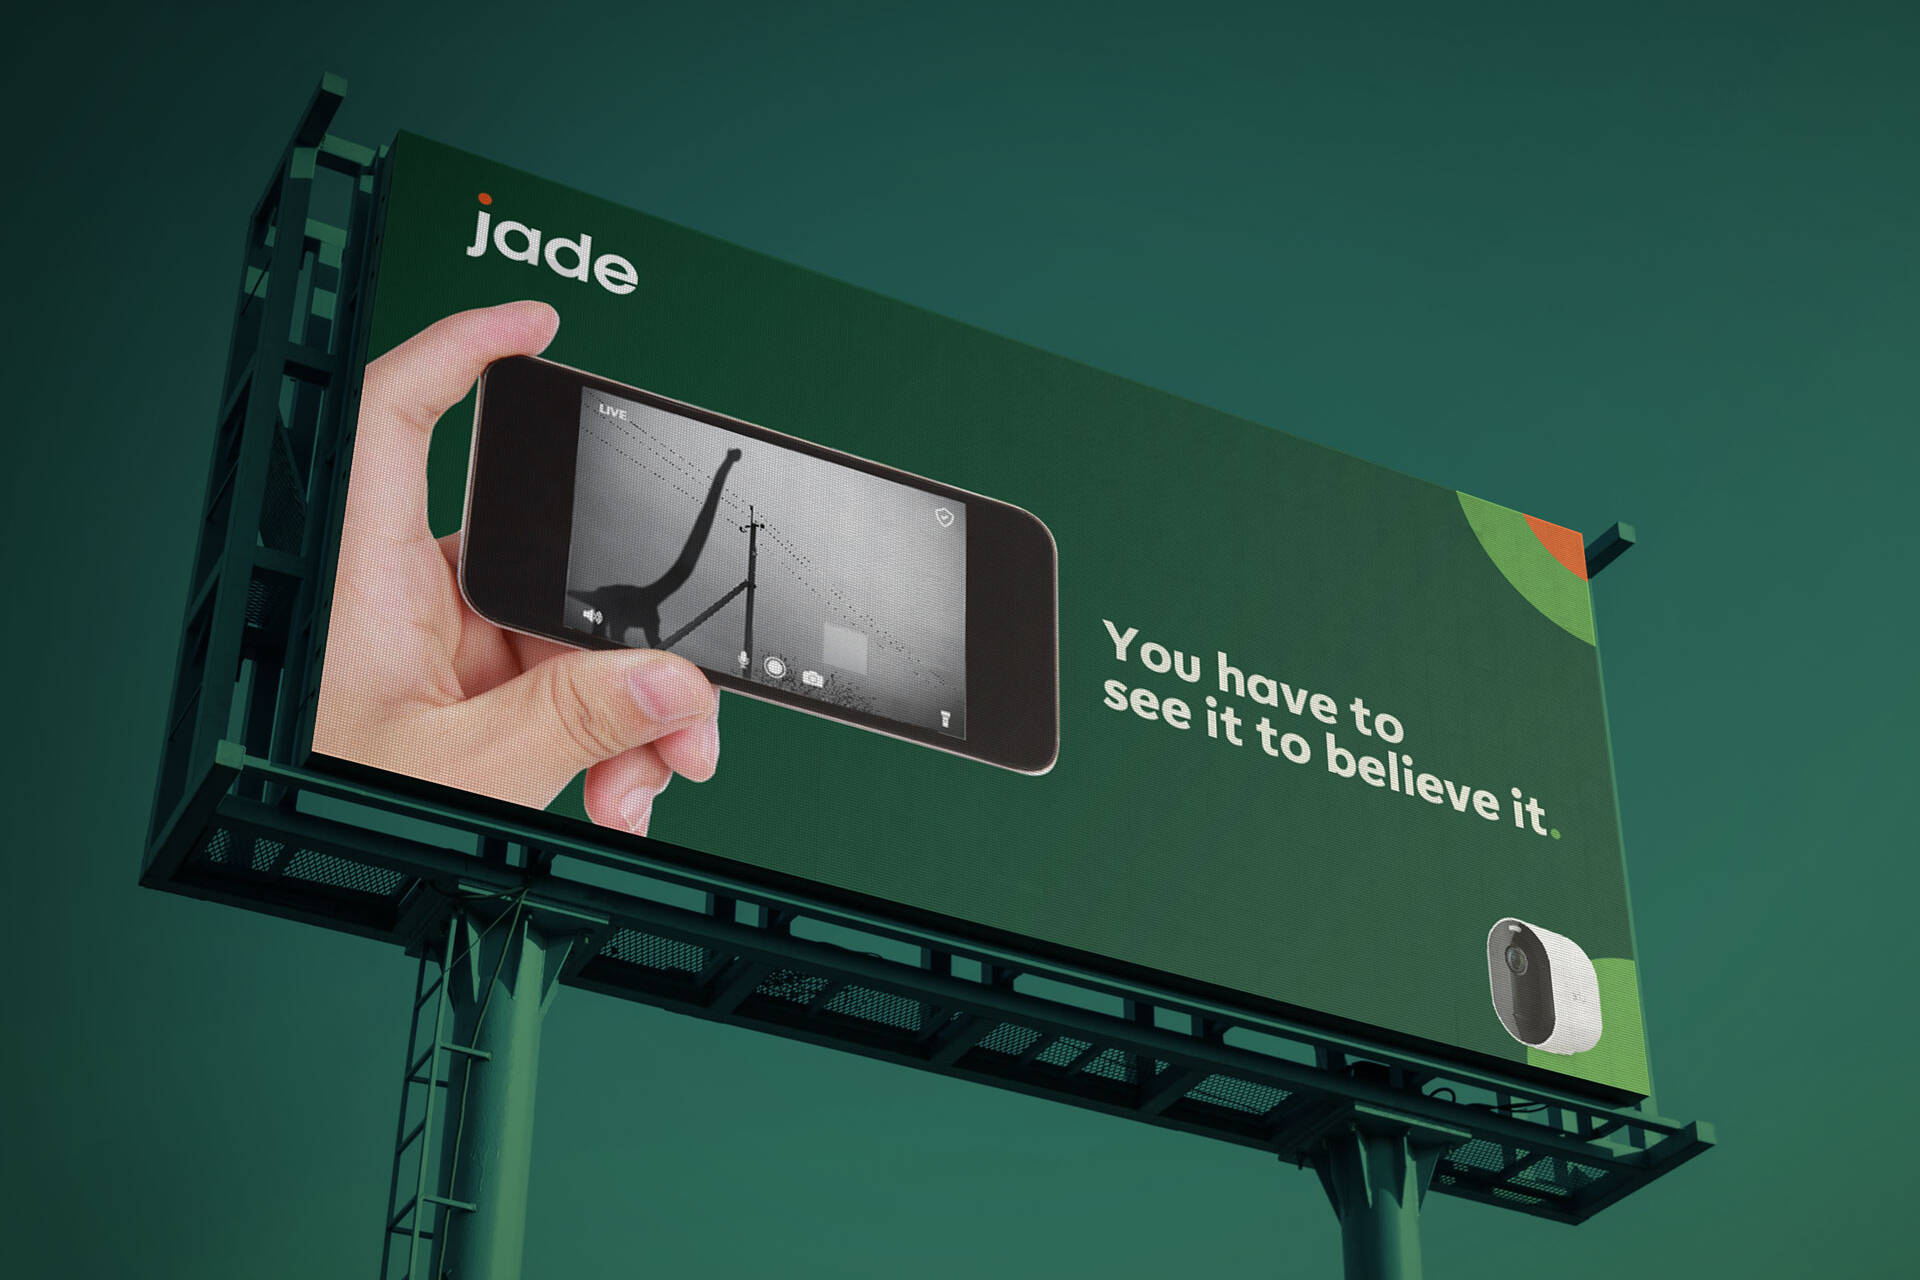 Billboard for Jade Communications featuring lock ness monster.